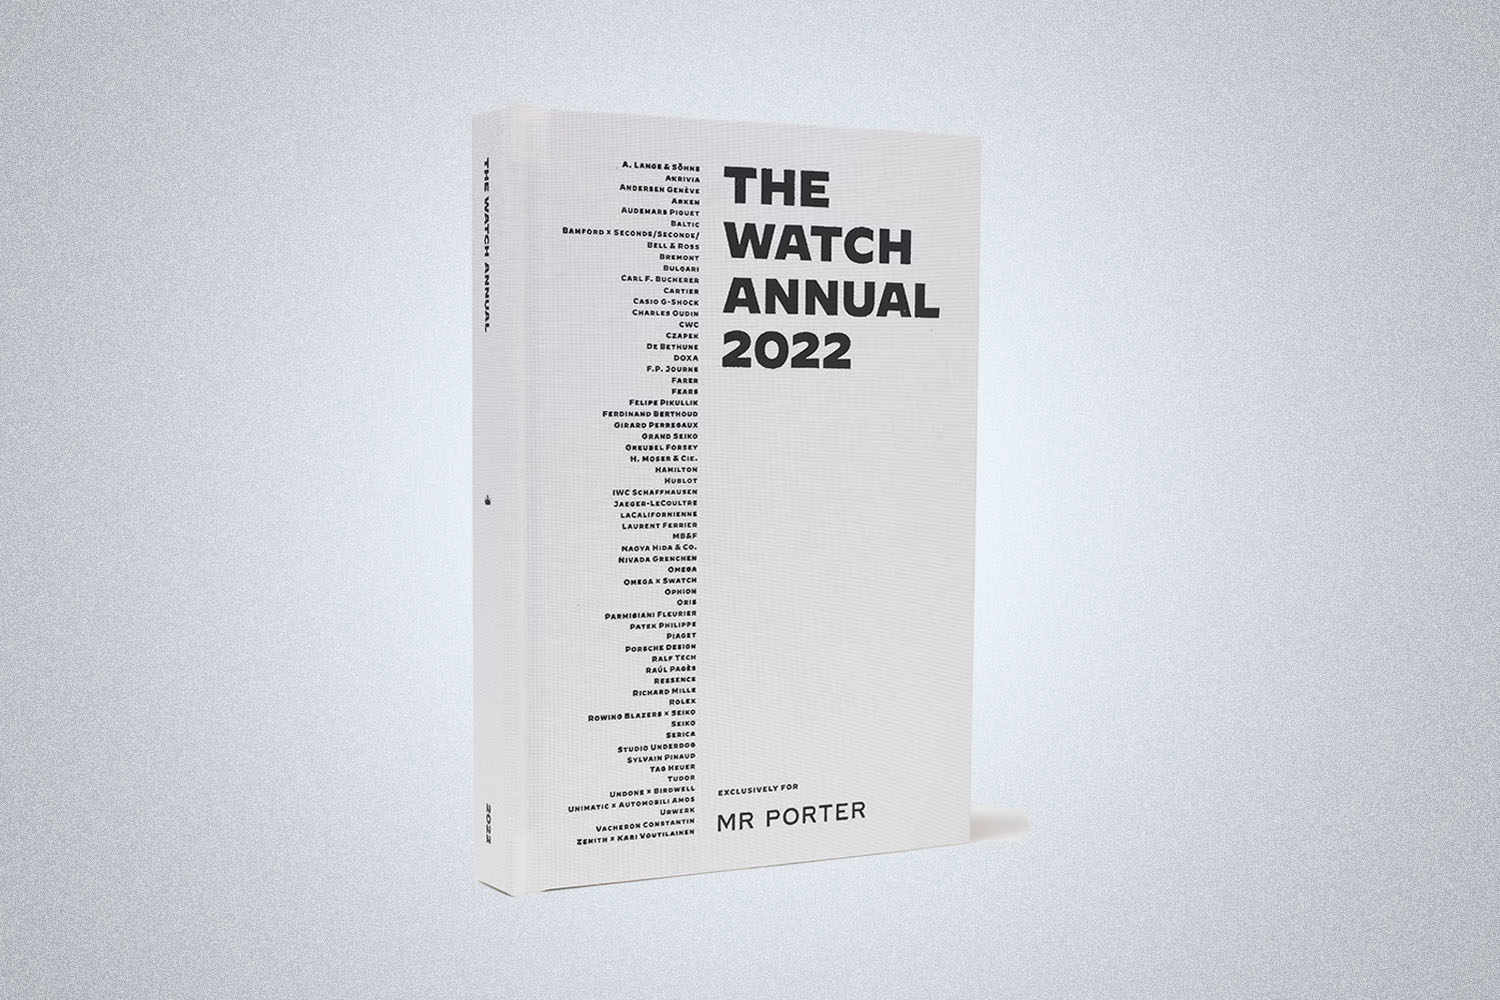 The Watch Annual 2022 Exclusive MR PORTER Edition Hardcover Book